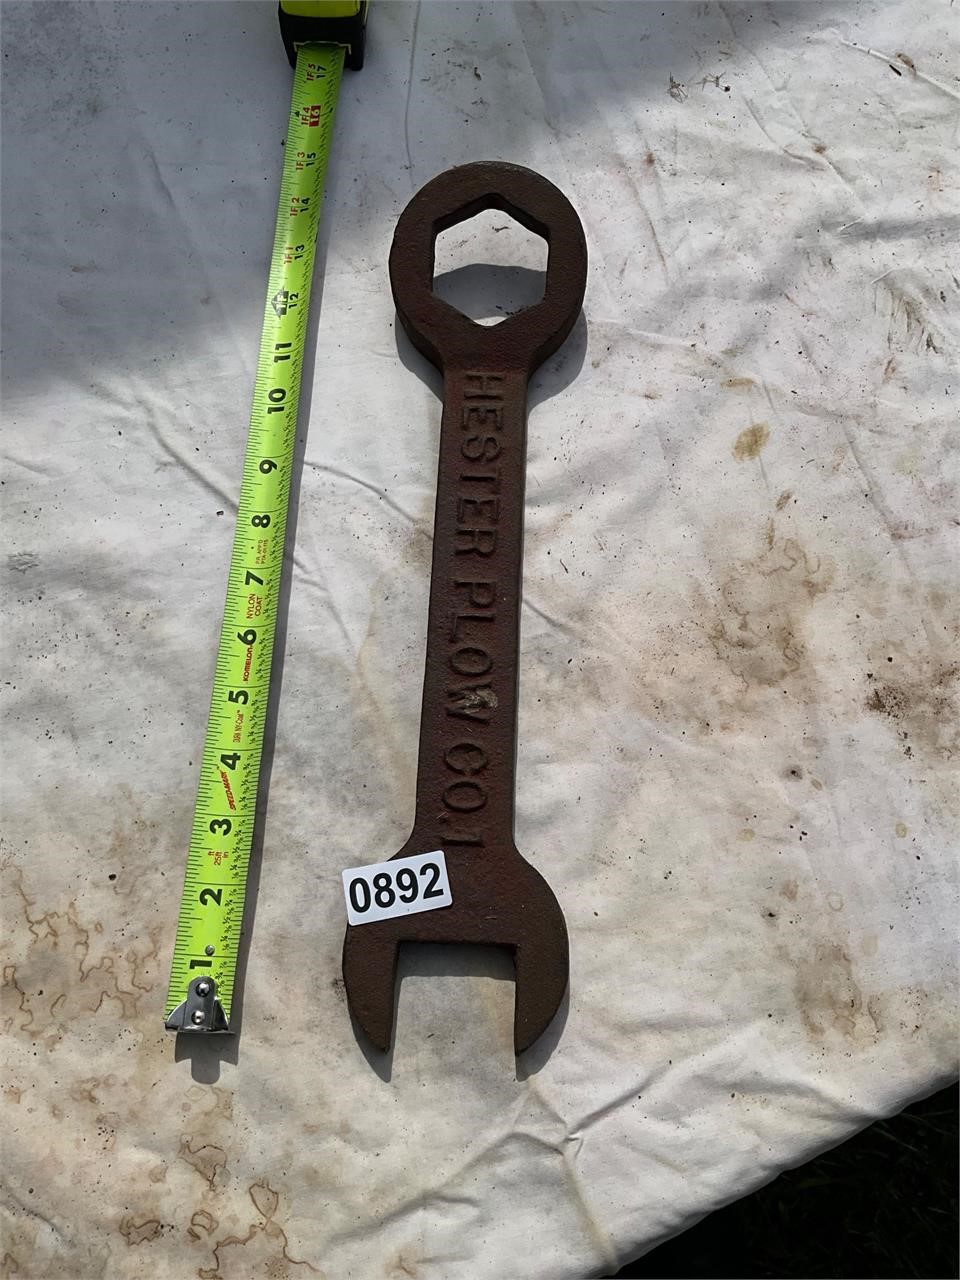 Hester Plow Co- large wrench